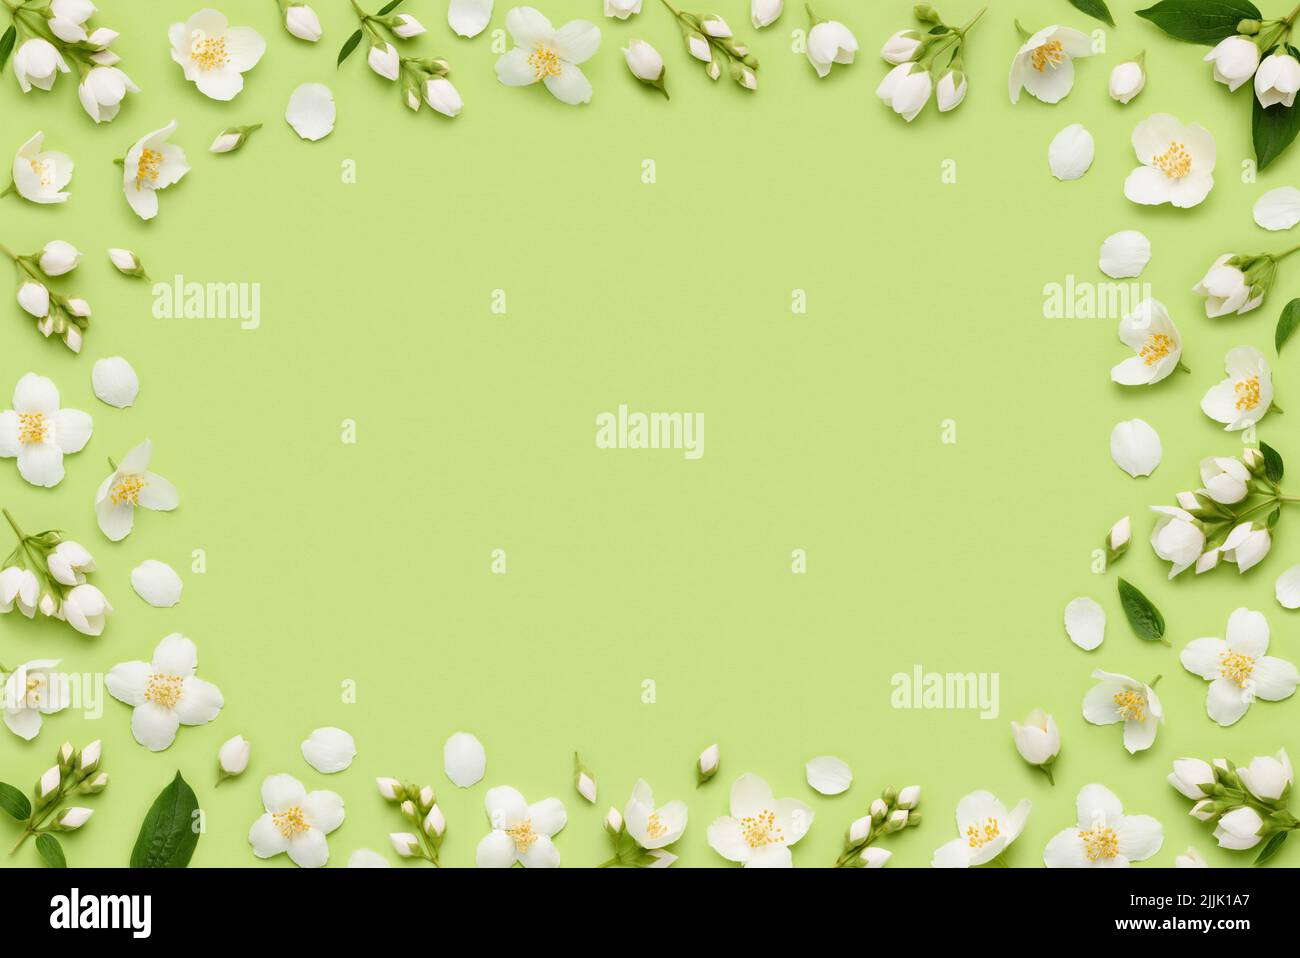 Floral frame border of Jasminum Grandiflorum Royal Jasmine flowers, leaves buds and petals on green background top view flat lay Stock Photo